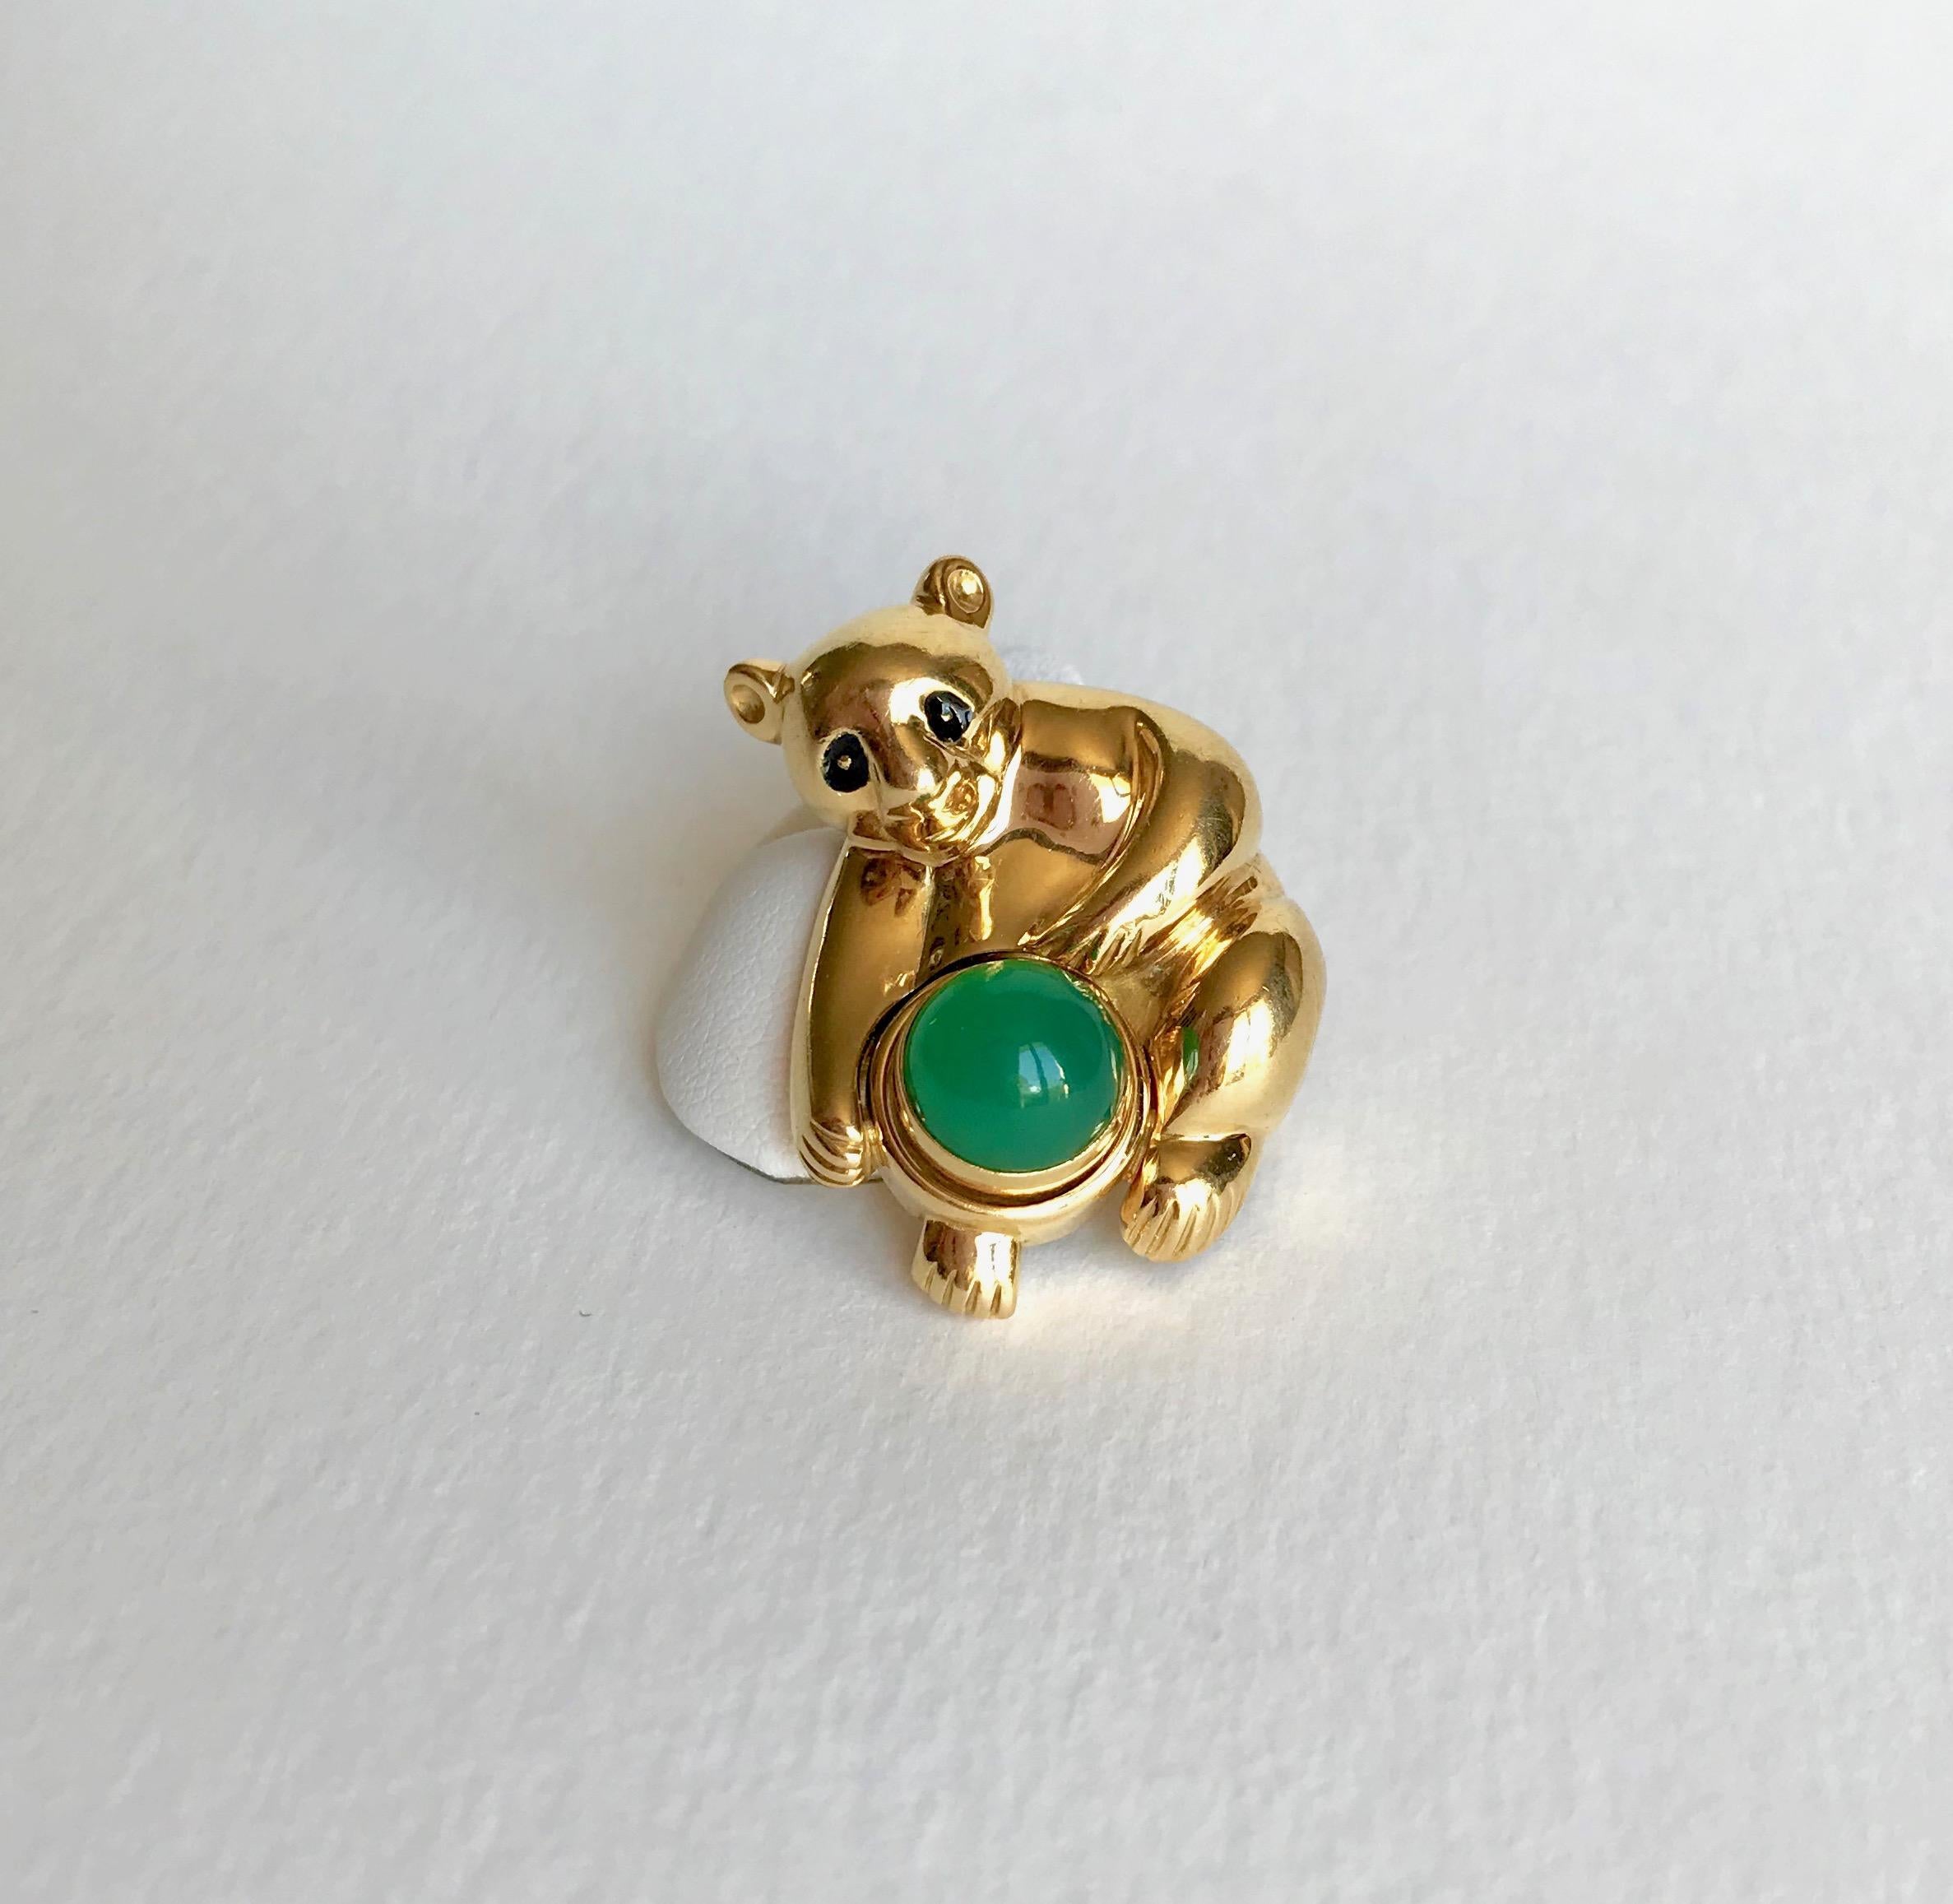 PIAGET Koala Brooch in 18 kt yellow Gold and Chrysoprase
Koala Brooch in 18 kt yellow Gold and PIAGET Chrysoprase signed PIAGET and numbered and dated 1995. The Center is set with a removable Cabochon-cut Chrysoprase.
Gross Weight: 18 g Height: 3.5